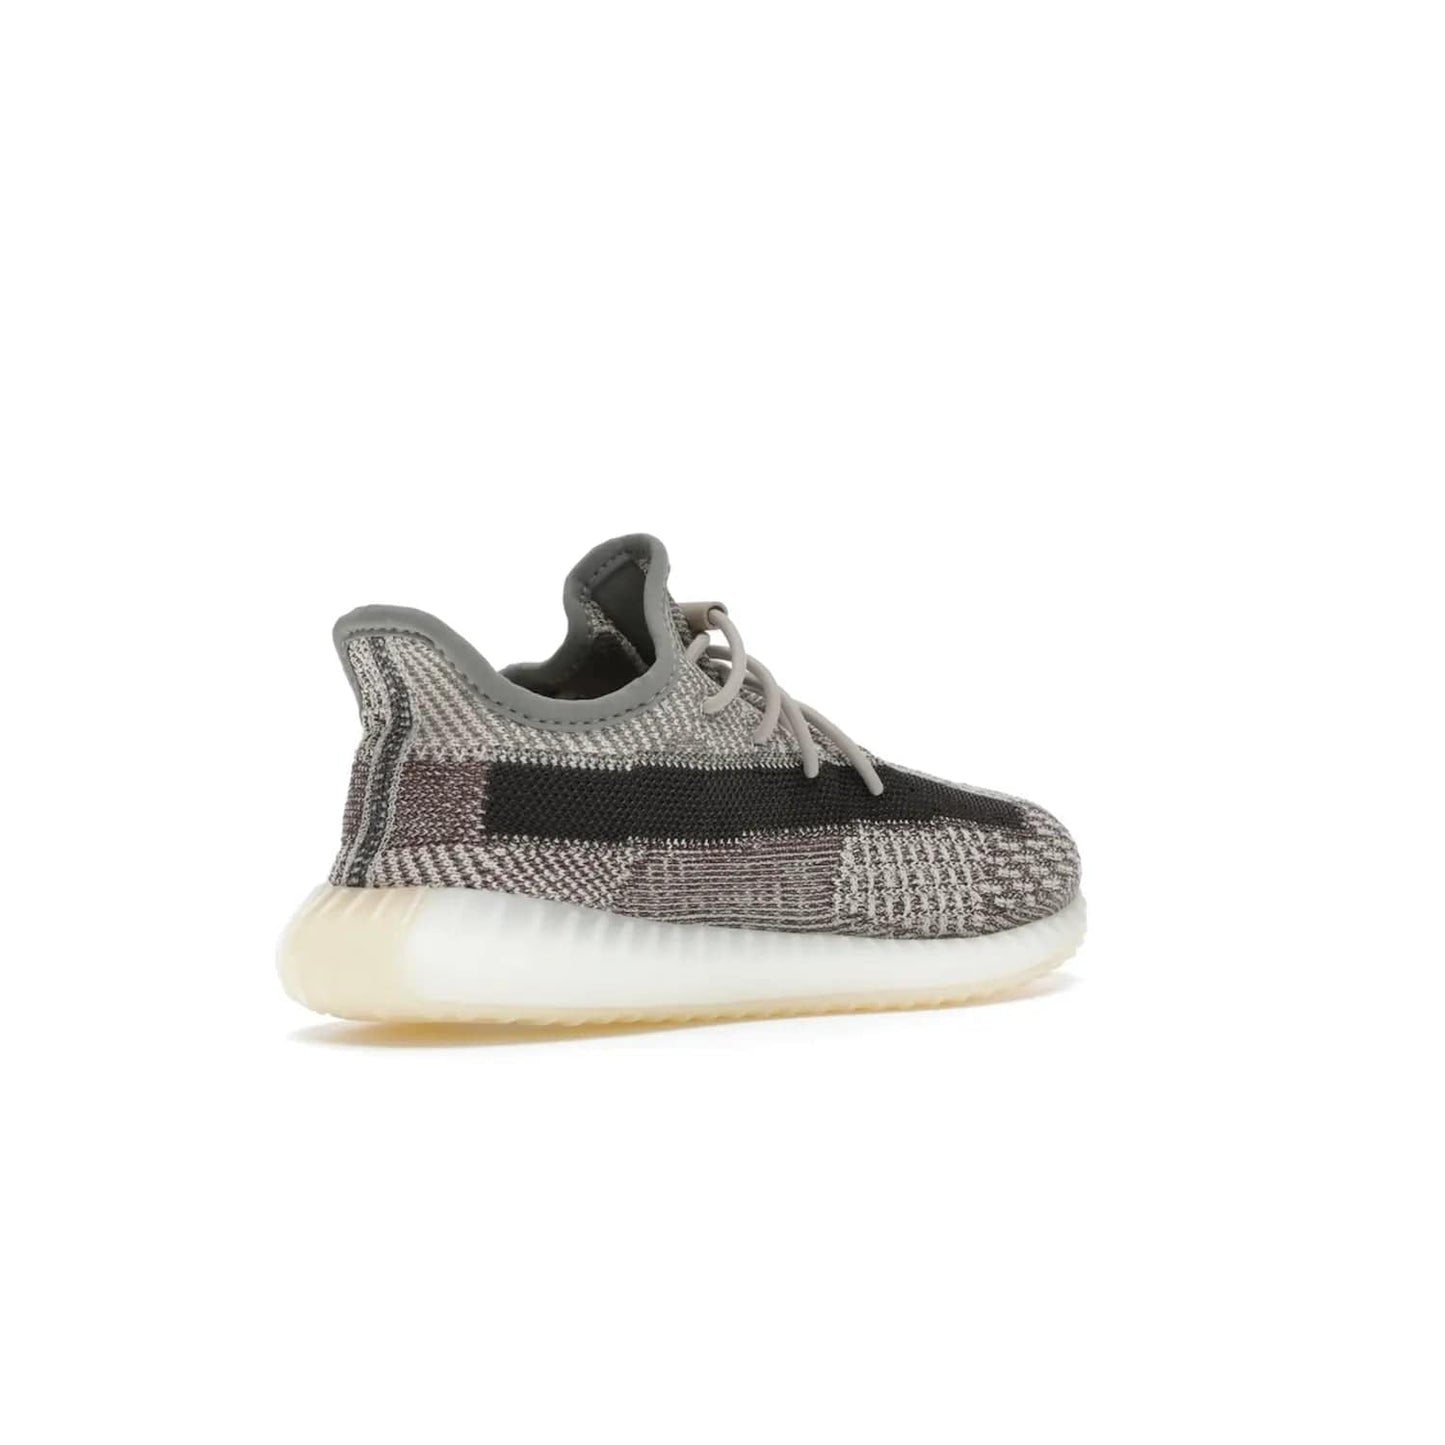 adidas Yeezy Boost 350 V2 Zyon (Kids) - Image 33 - Only at www.BallersClubKickz.com - The adidas Yeezy Boost 350 V2 Zyon (Kids) - perfect pick for fashion-savvy kids. Features soft Primeknit upper, lace closure & colorful patterning. Comfort & style for kids' summer outfits!